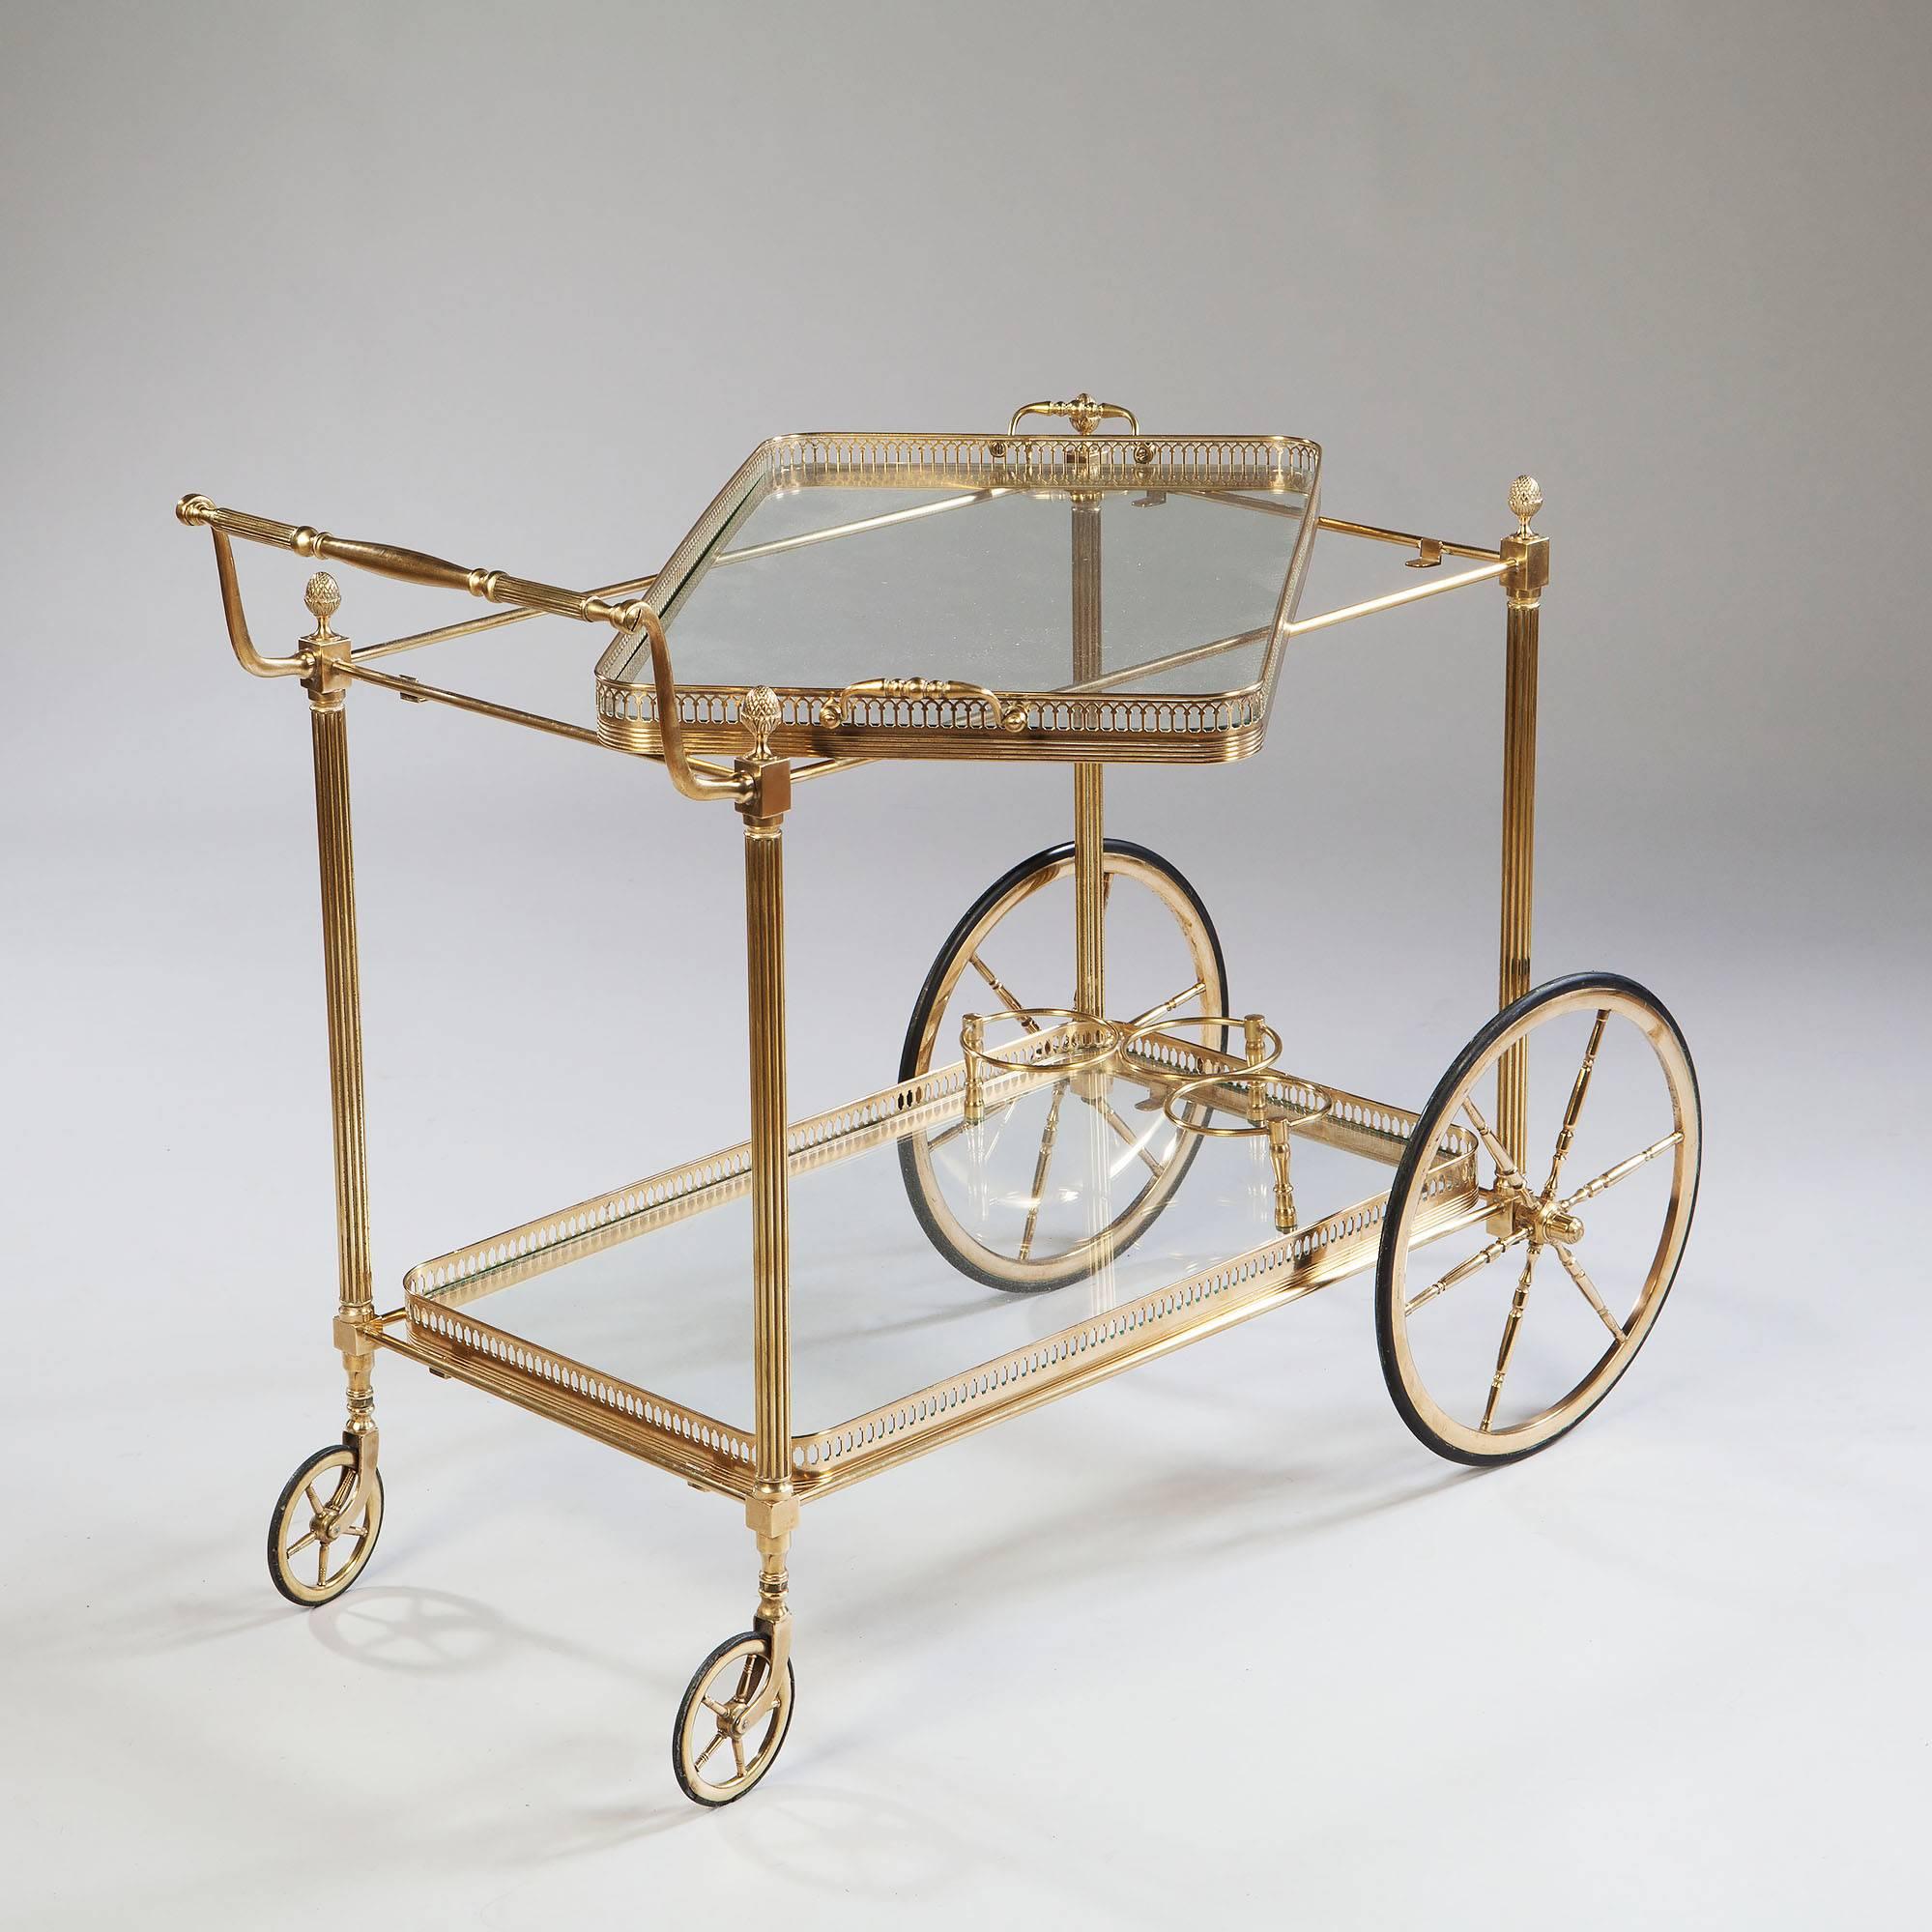 A fine quality early 20th century polished brass and glass two tier drinks trolley, both trays removable and the upper one with handles. This trolley with larger wheels at the front.